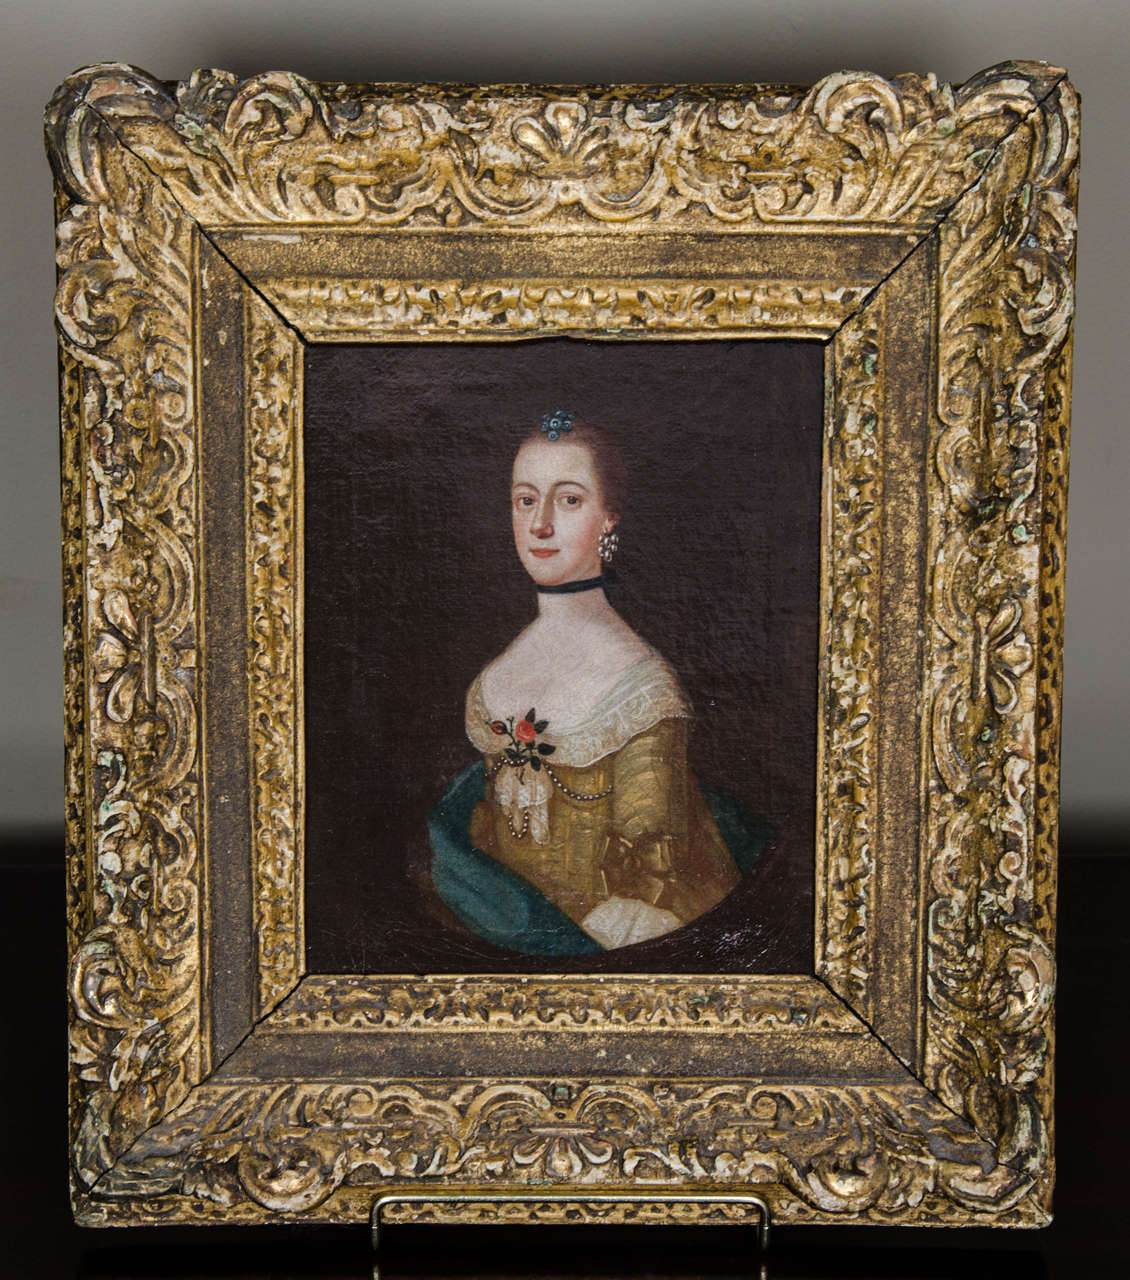 A small Georgian oil portrait of a young lady circa 1730. A very charming small scale oil painting of very unusual size. This is not a miniature but a proper oil painting on canvas in a hand carved and gild frame of the same period. The sitter is